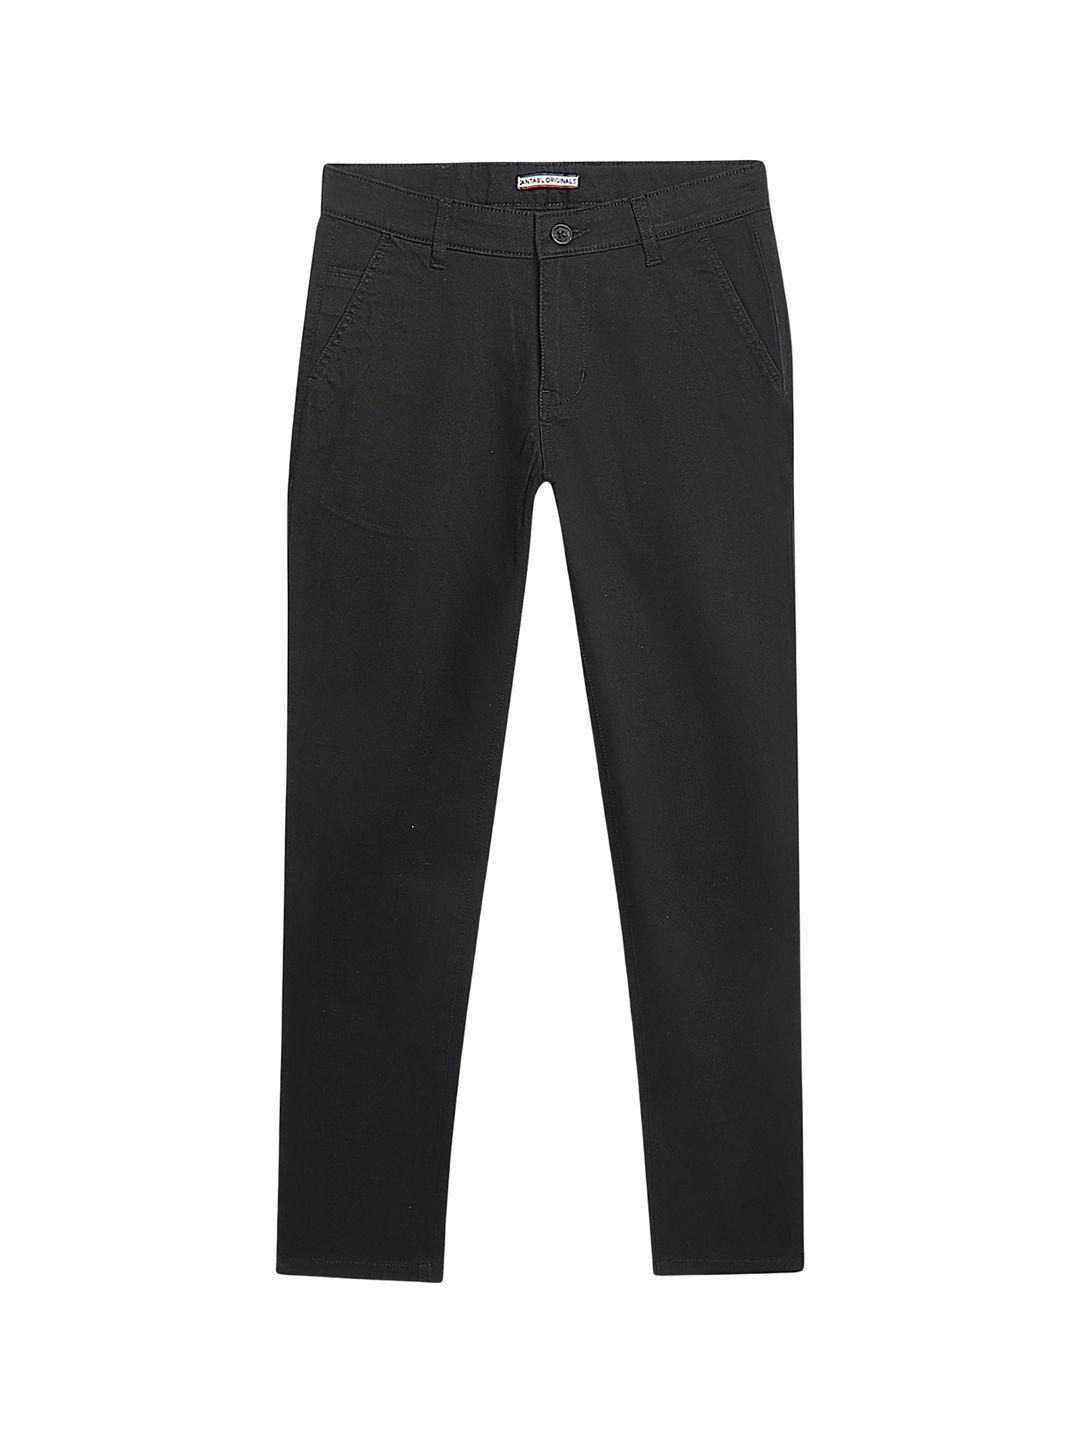 cantabil-boys-mid-rise-cotton-chinos-trousers